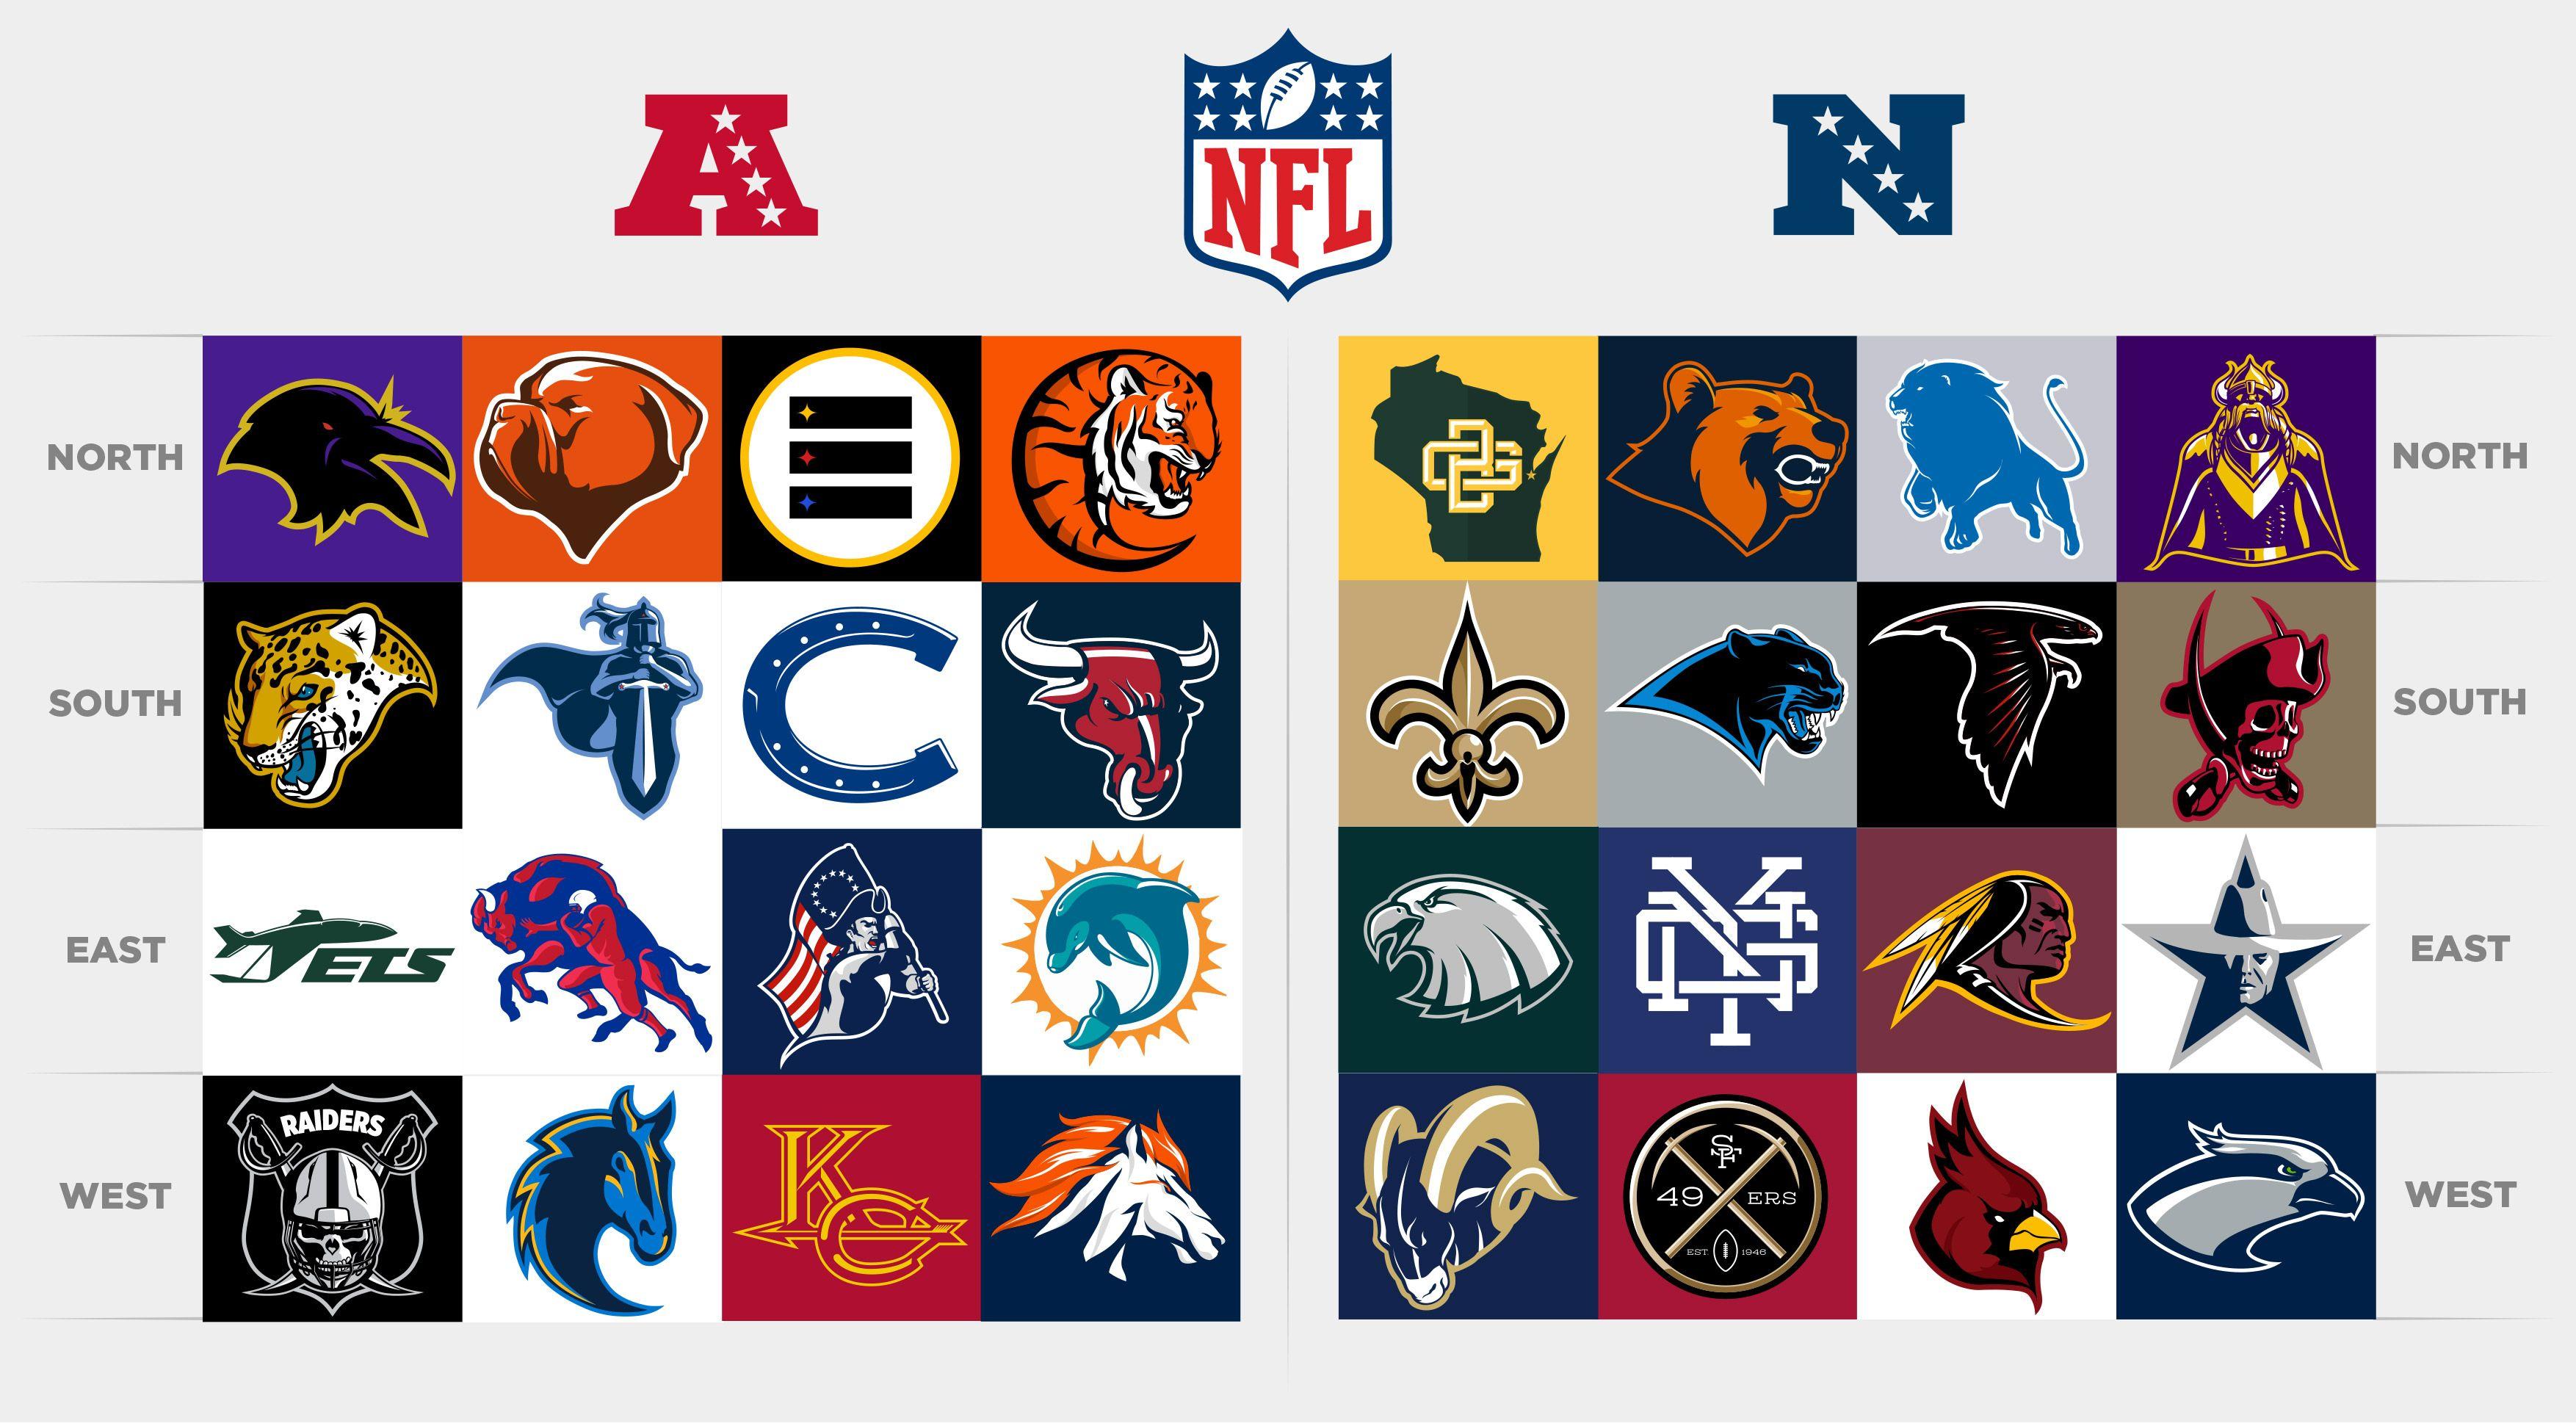 All NFL Logo - Check Out (And Nitpick) These Redesigned NFL Logos